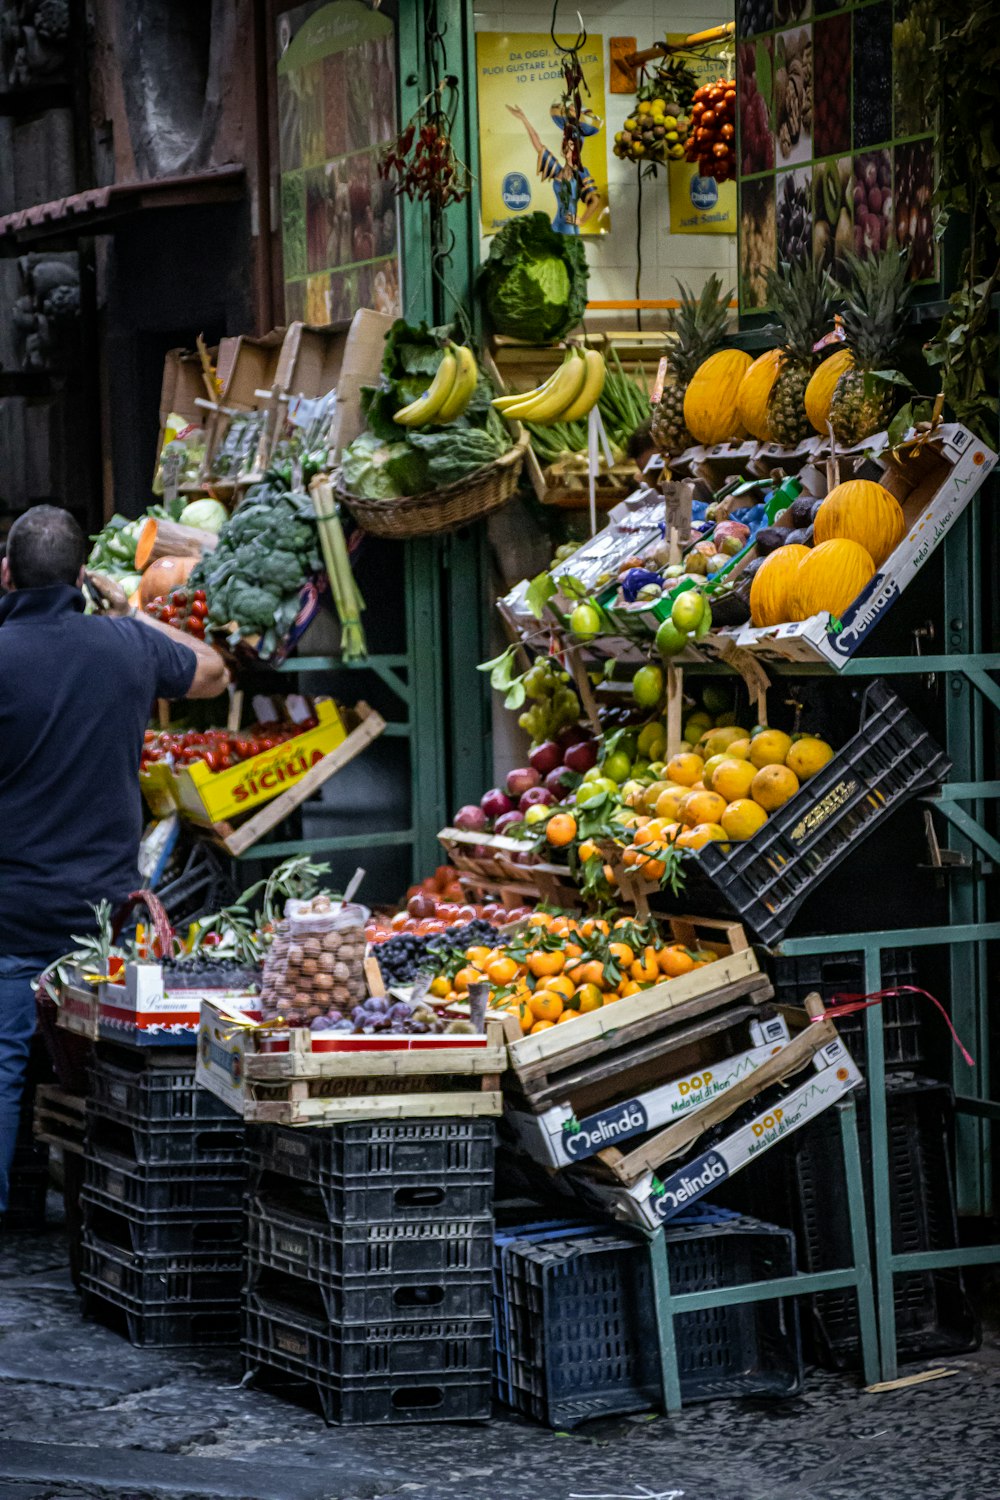 a person standing next to a fruit stand